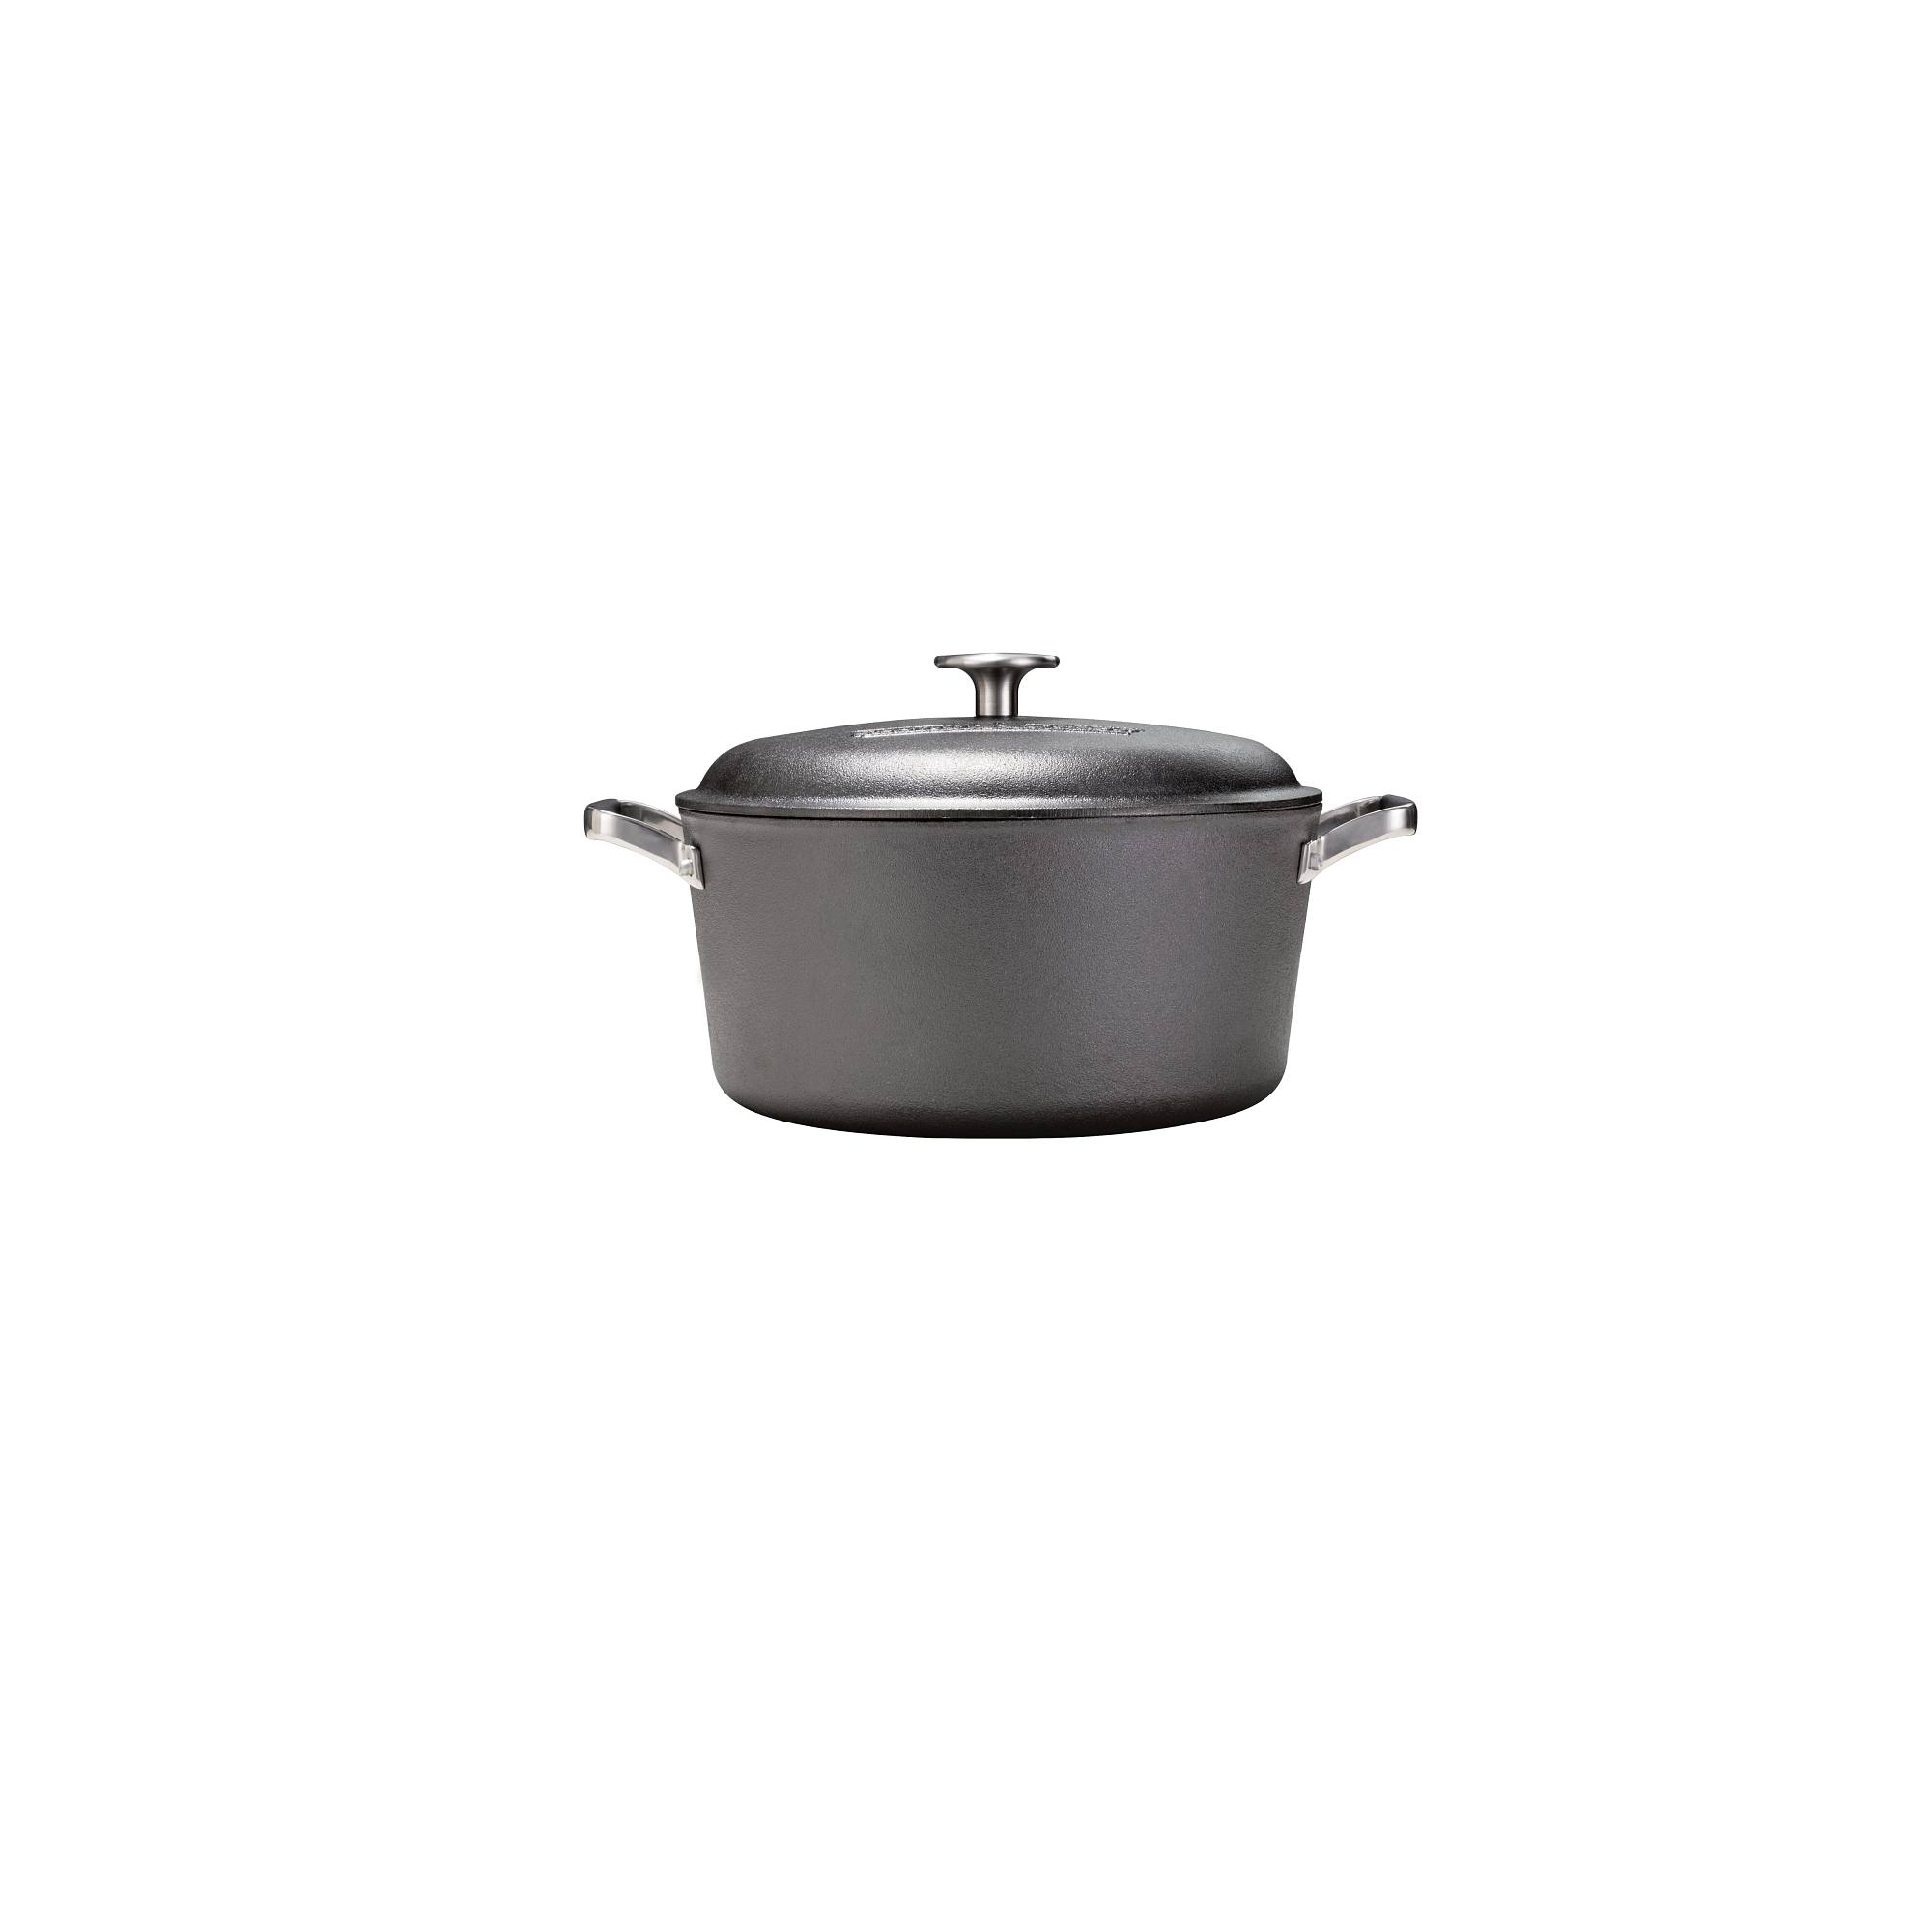 Camp Chef Heritage Dutch Oven 10